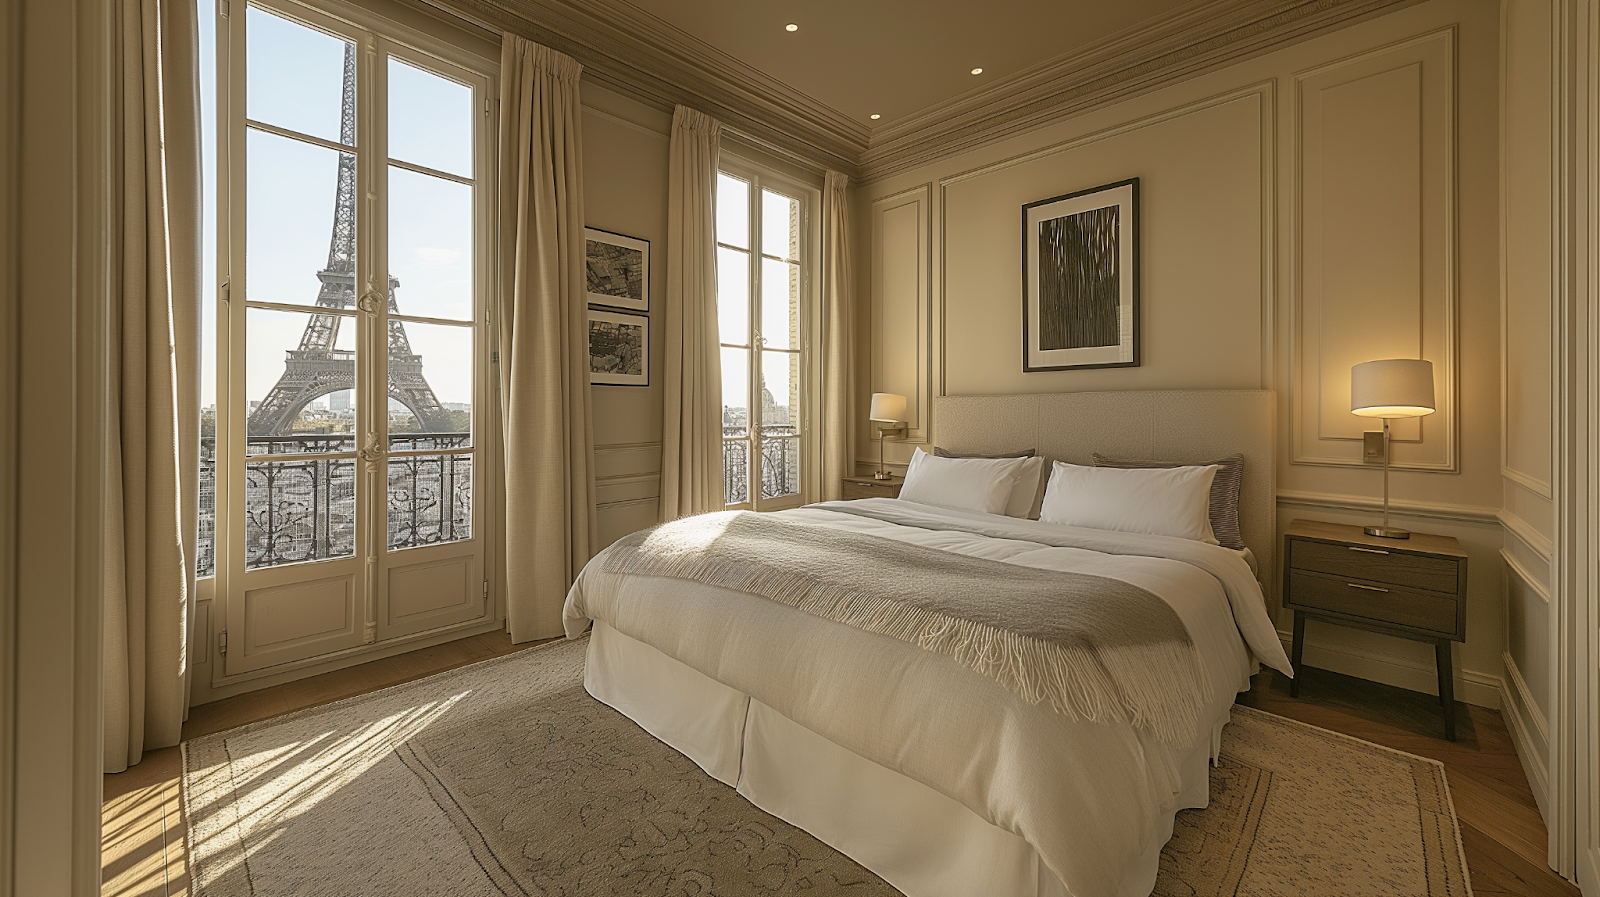 Elegant room in a Parisian boutique hotel with a view of the Eiffel Tower, blending modern and traditional decor.